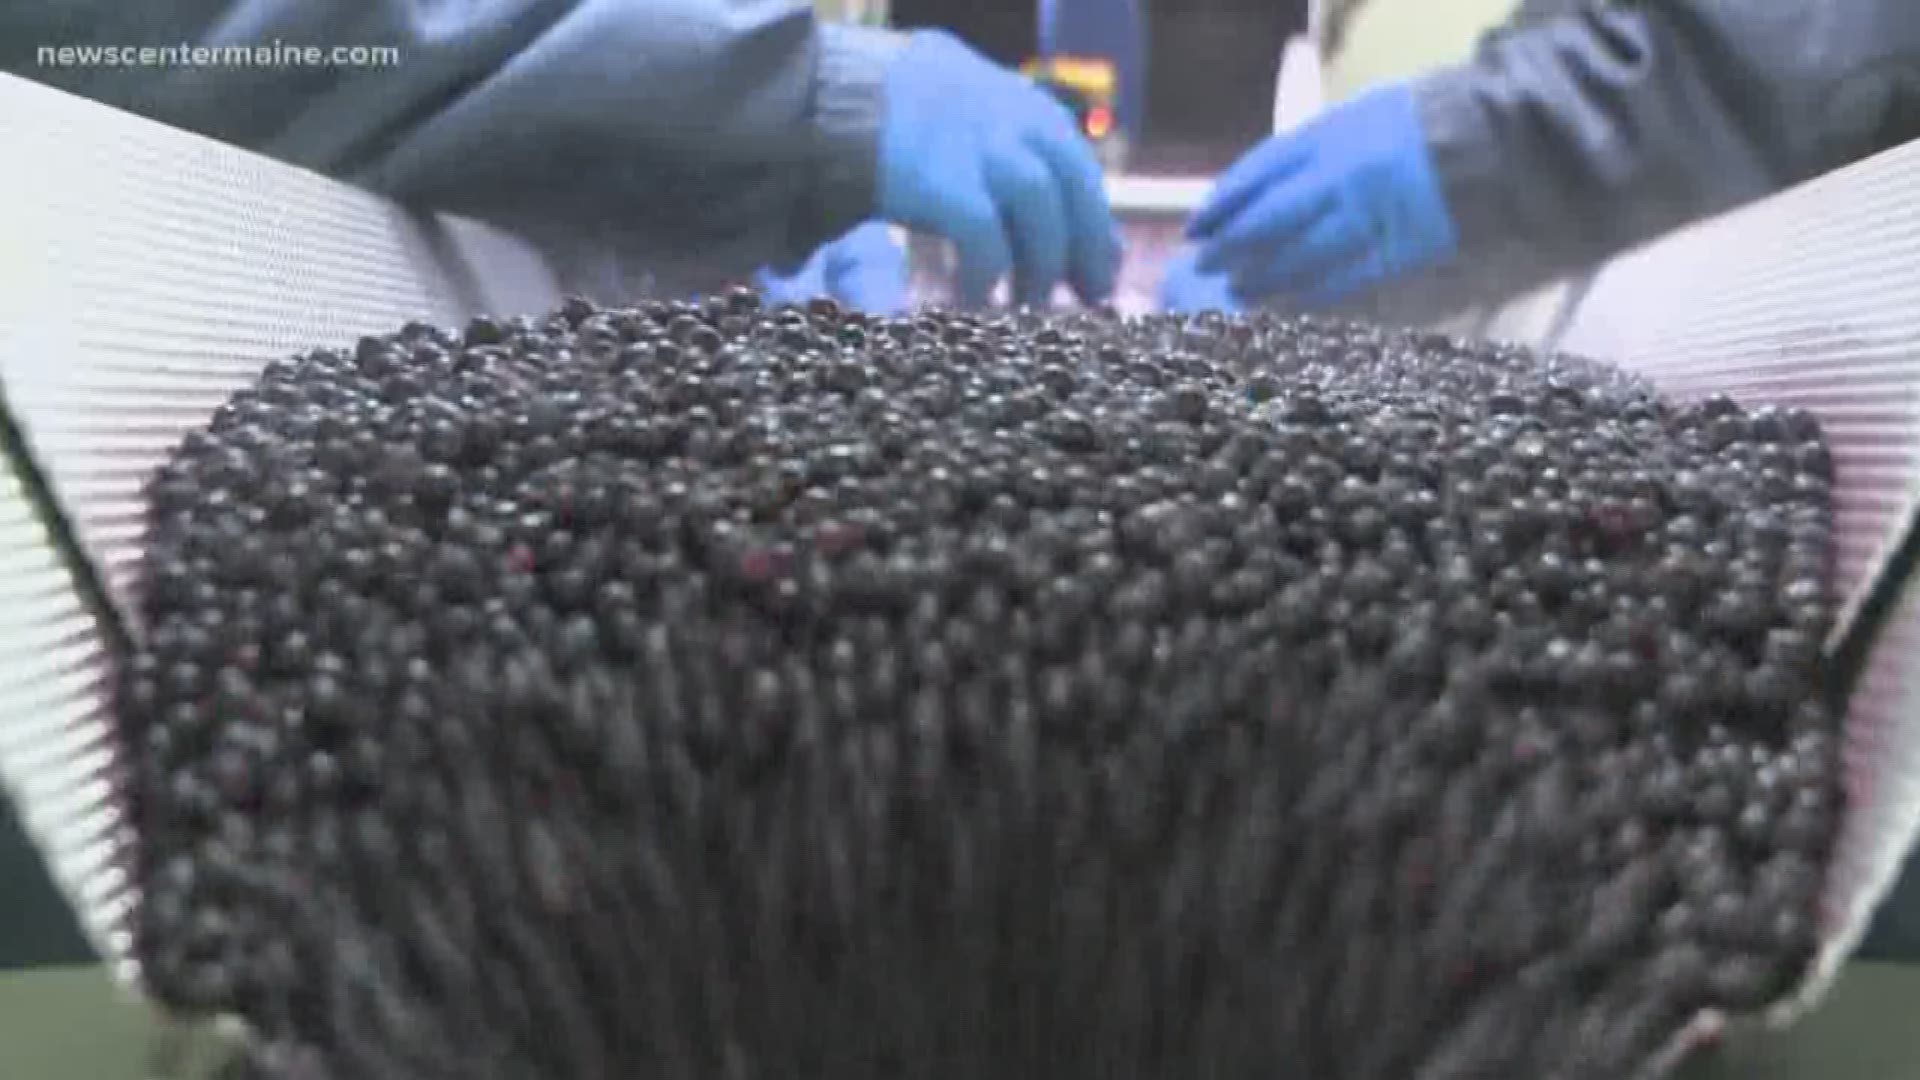 Zach Blanchard reports that the Maine blueberry industry is a bit "blue"